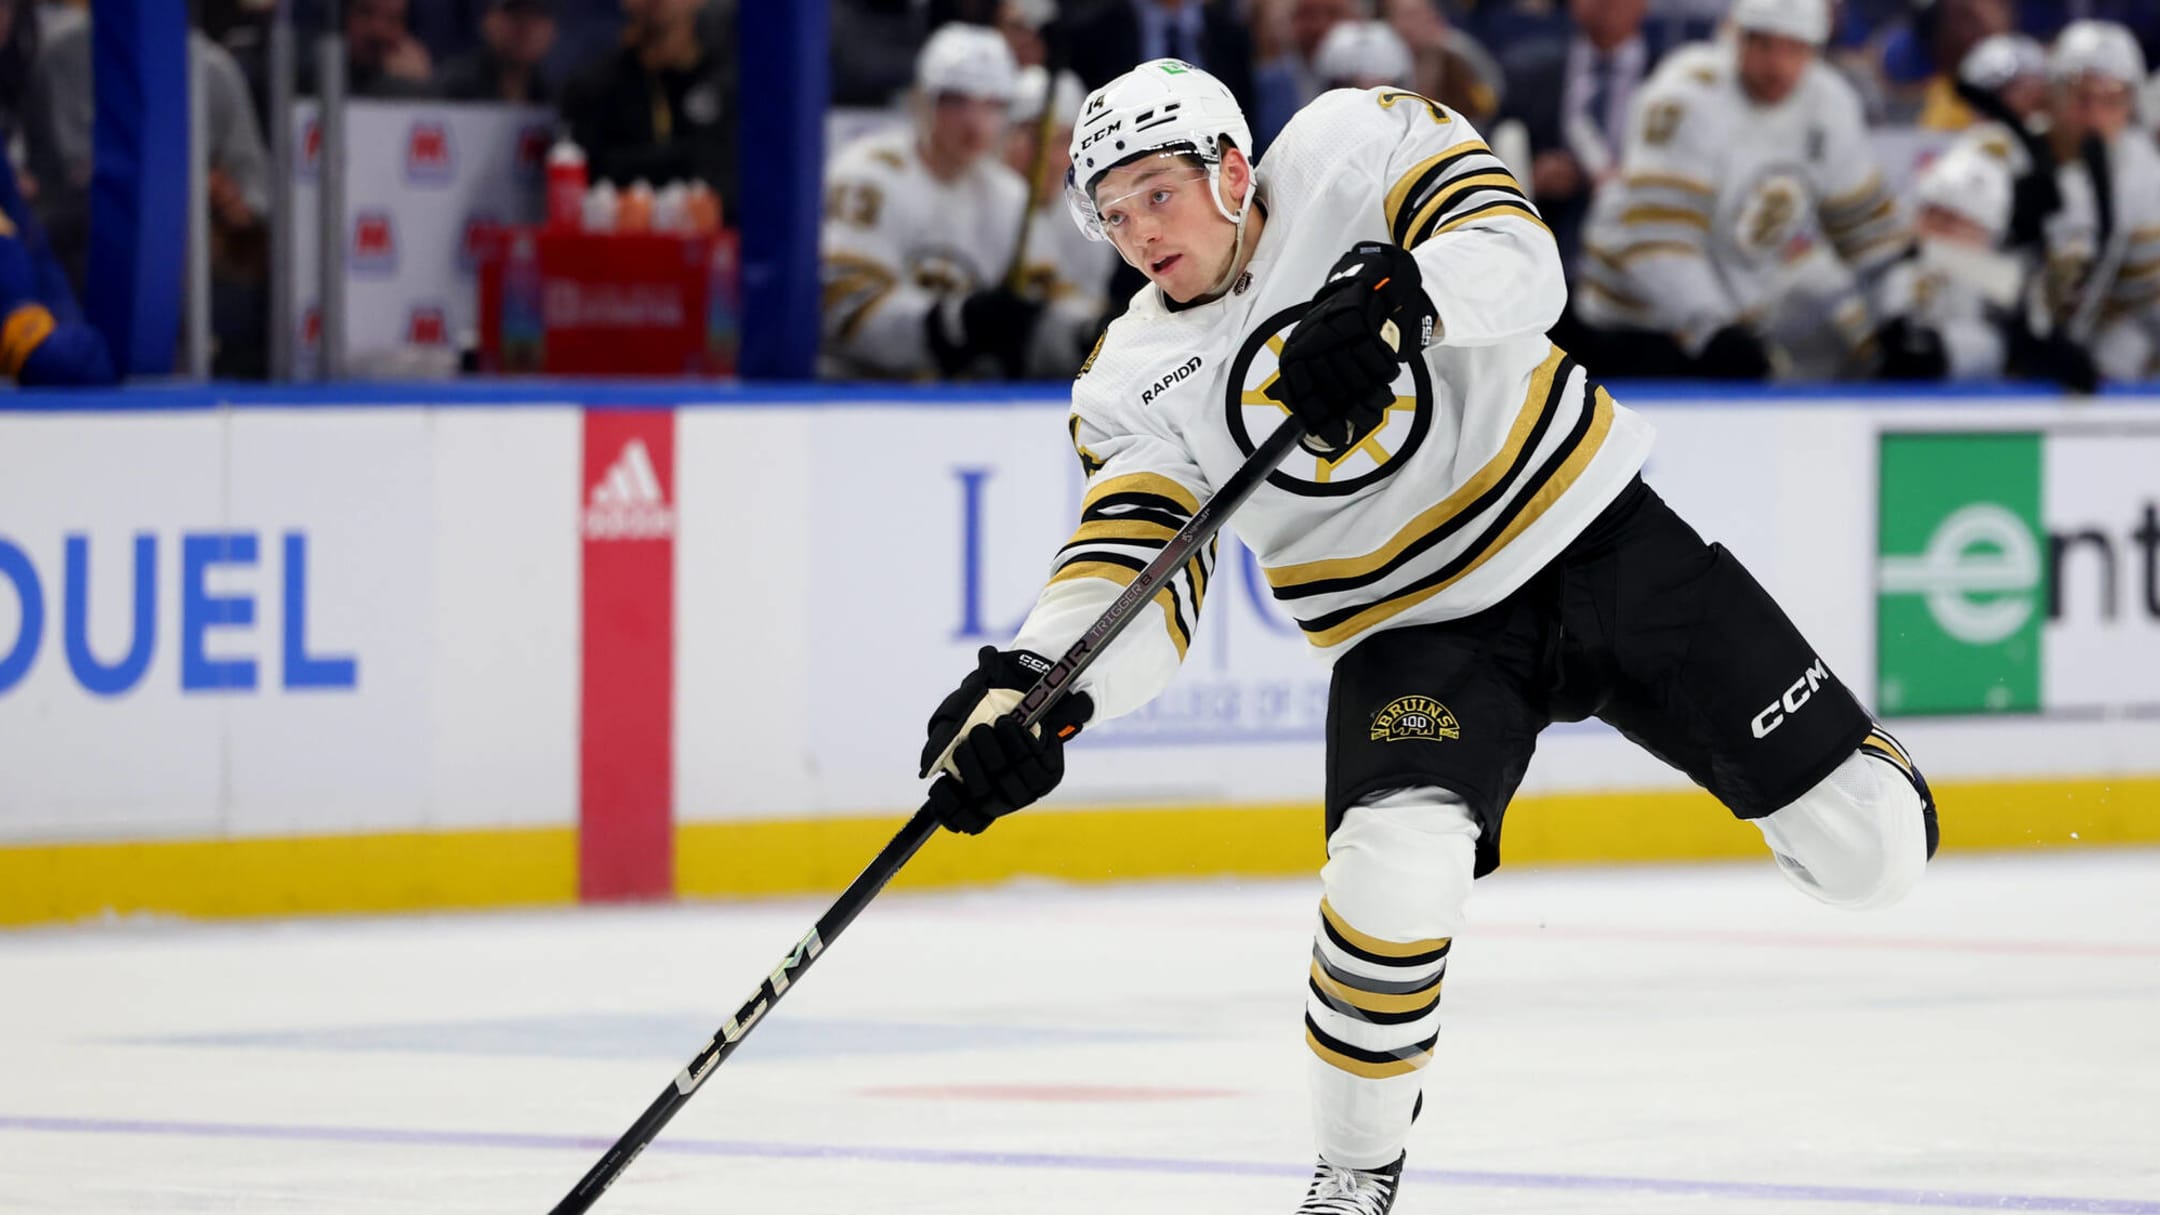 Jake DeBrusk hopes to avoid free agency, re-sign with Bruins